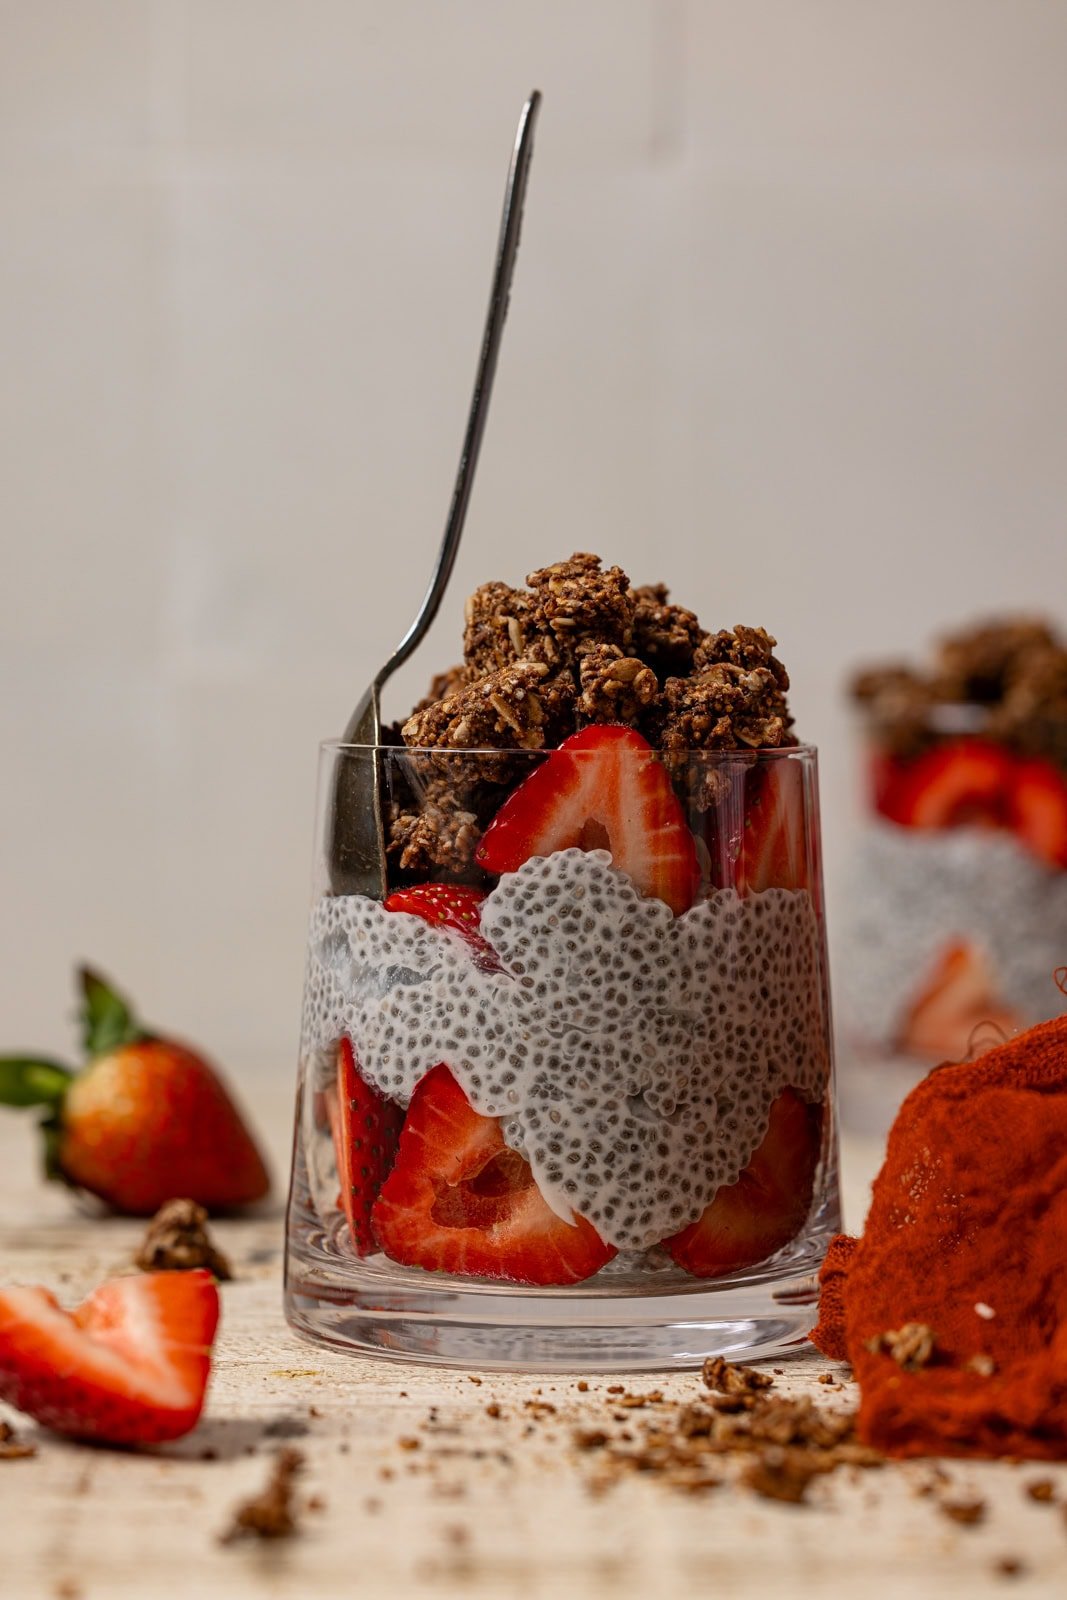 Cup of chia pudding with strawberries and a spoon.